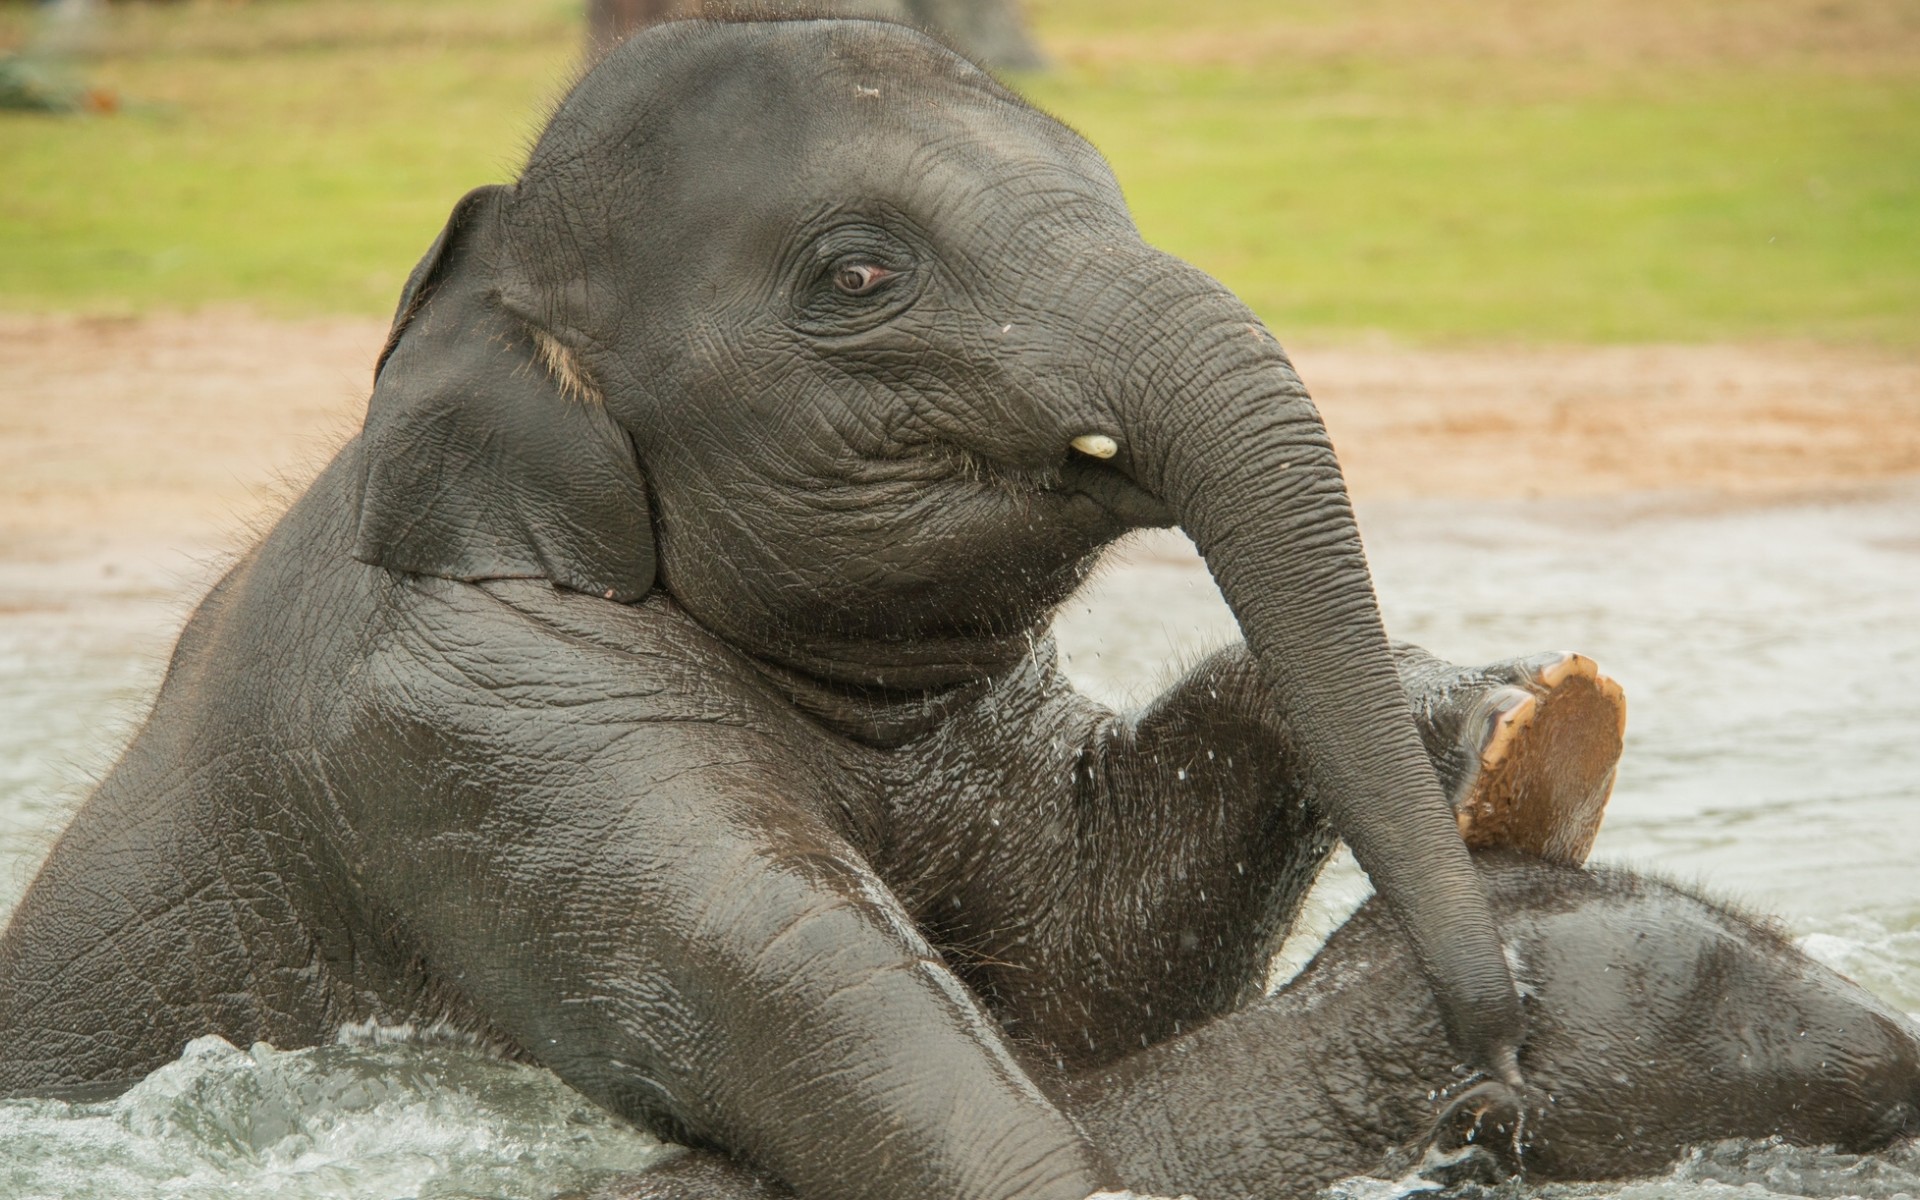 Elephant Bathing In The Water Wallpaper And Image